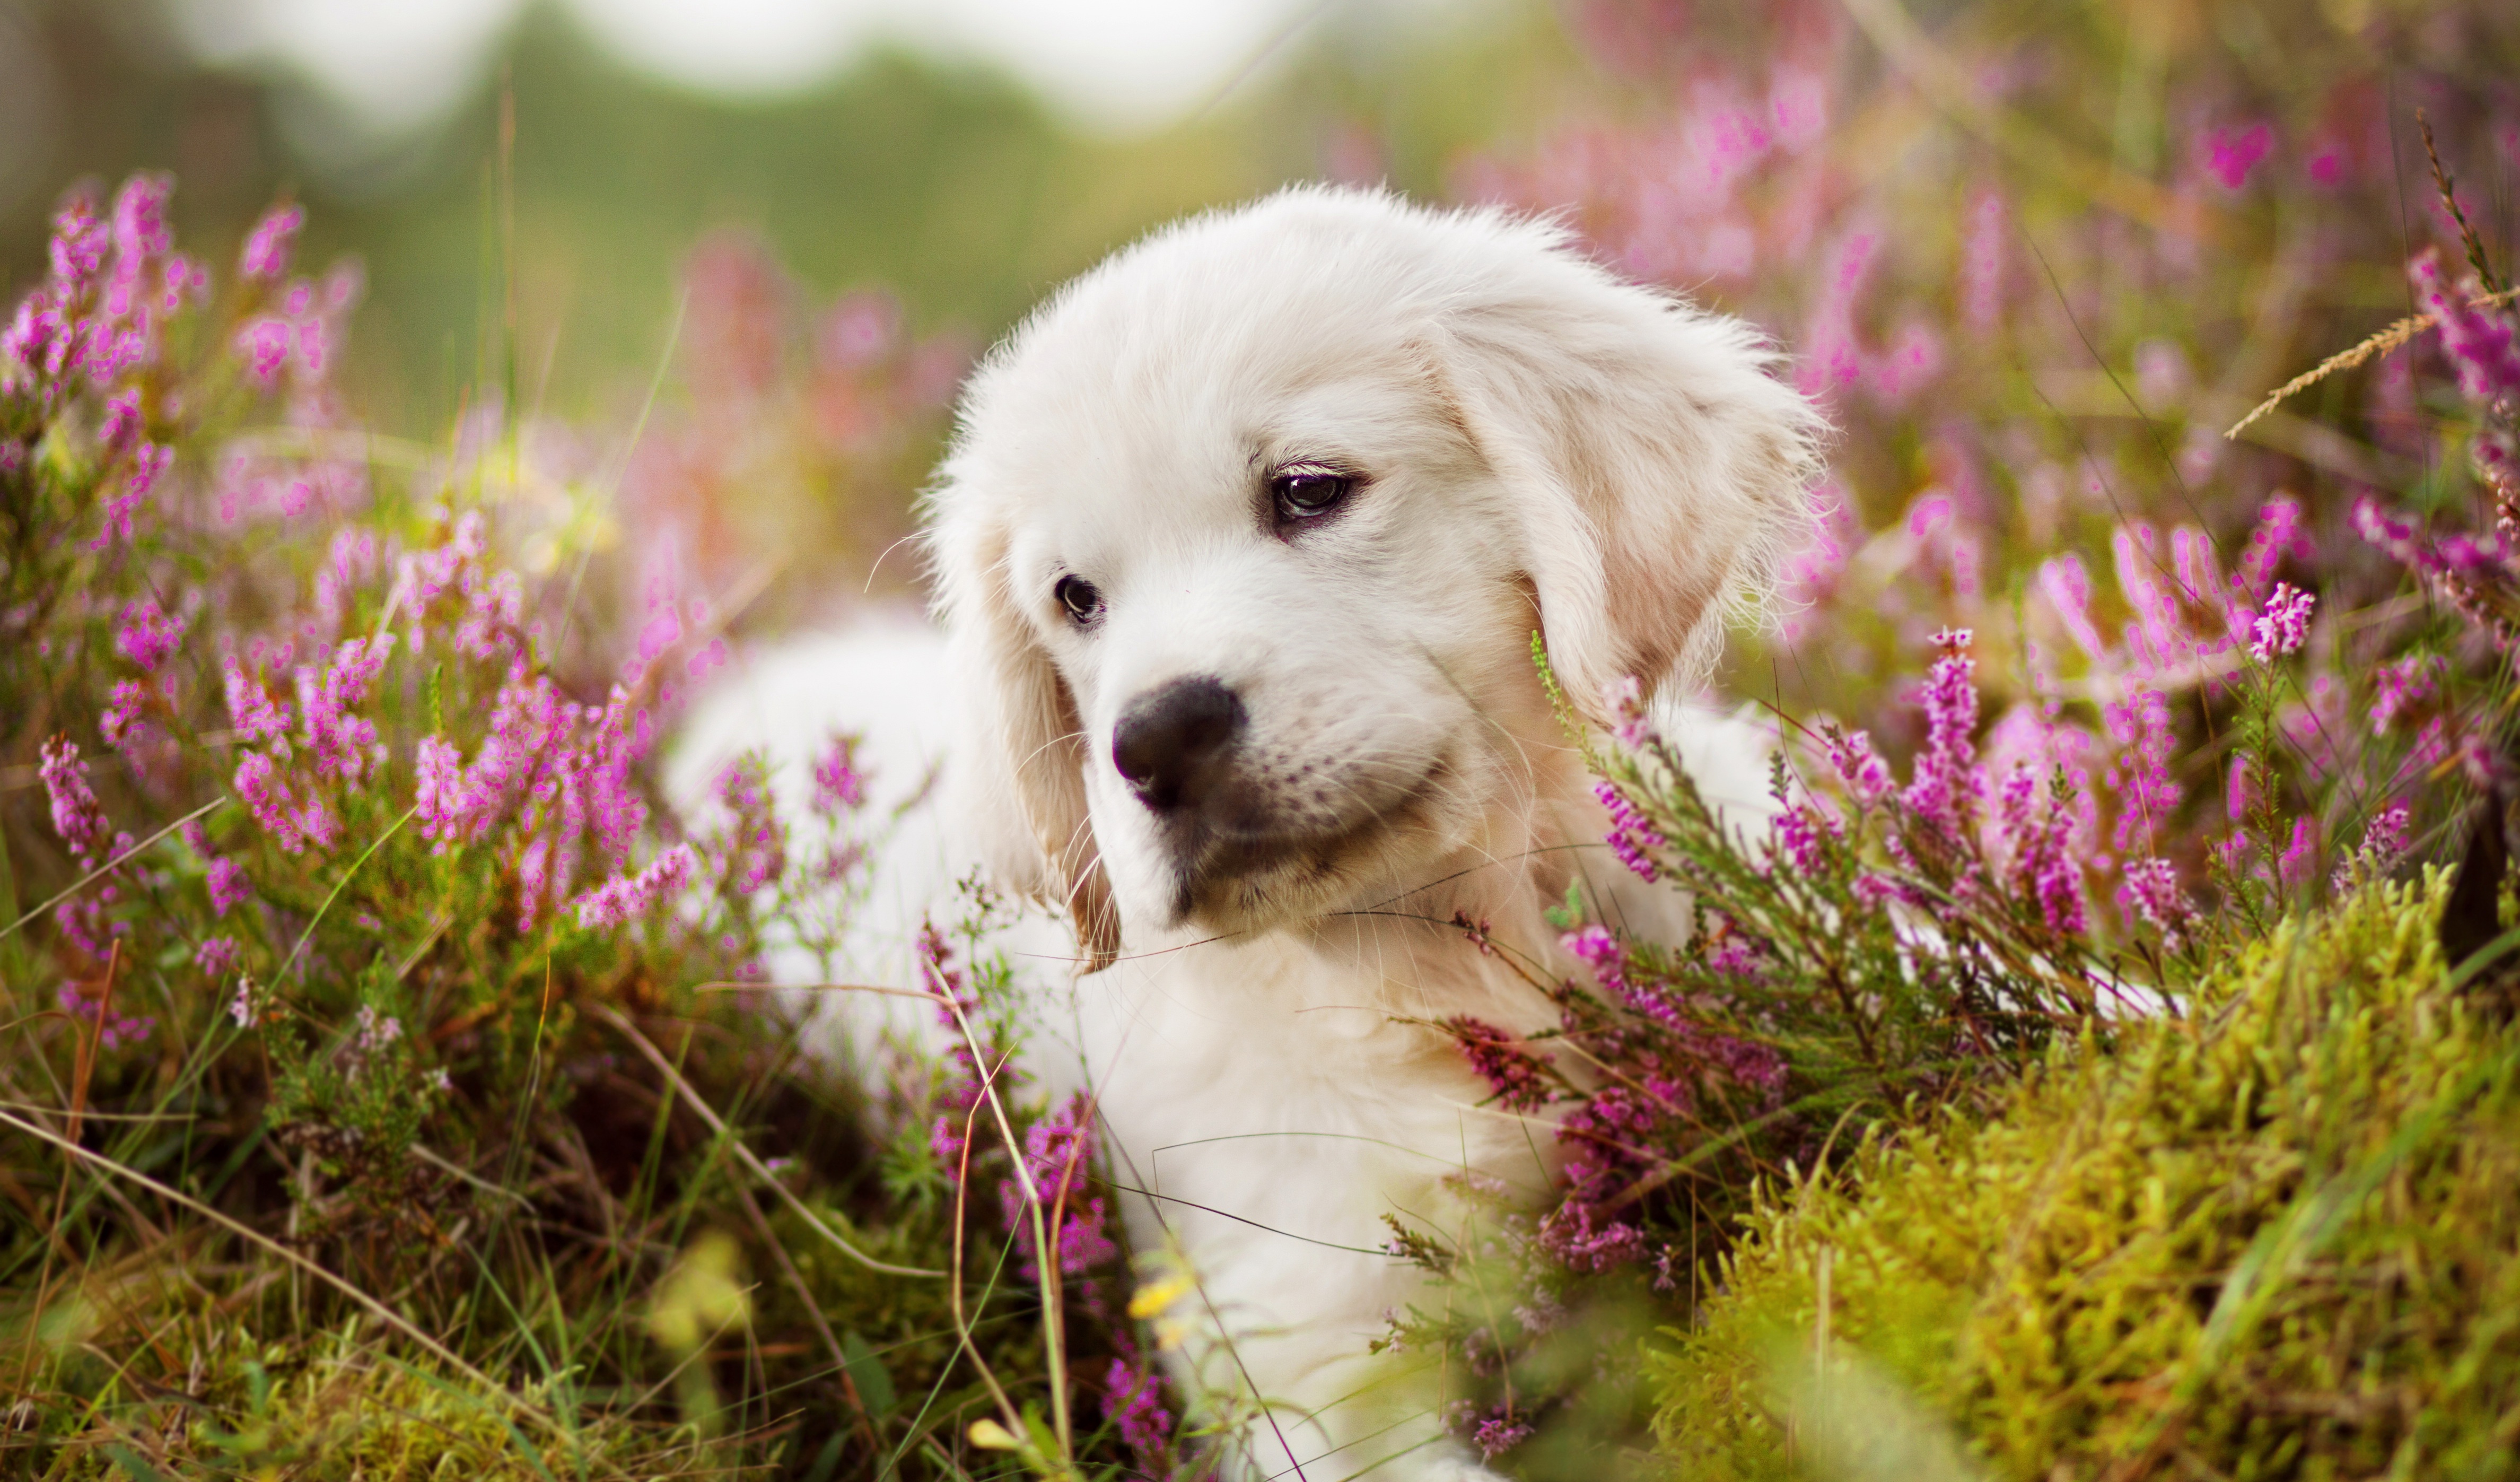 muzzle, moss, animal, golden retriever, baby animal, dog, pink flower, puppy, dogs Free Background